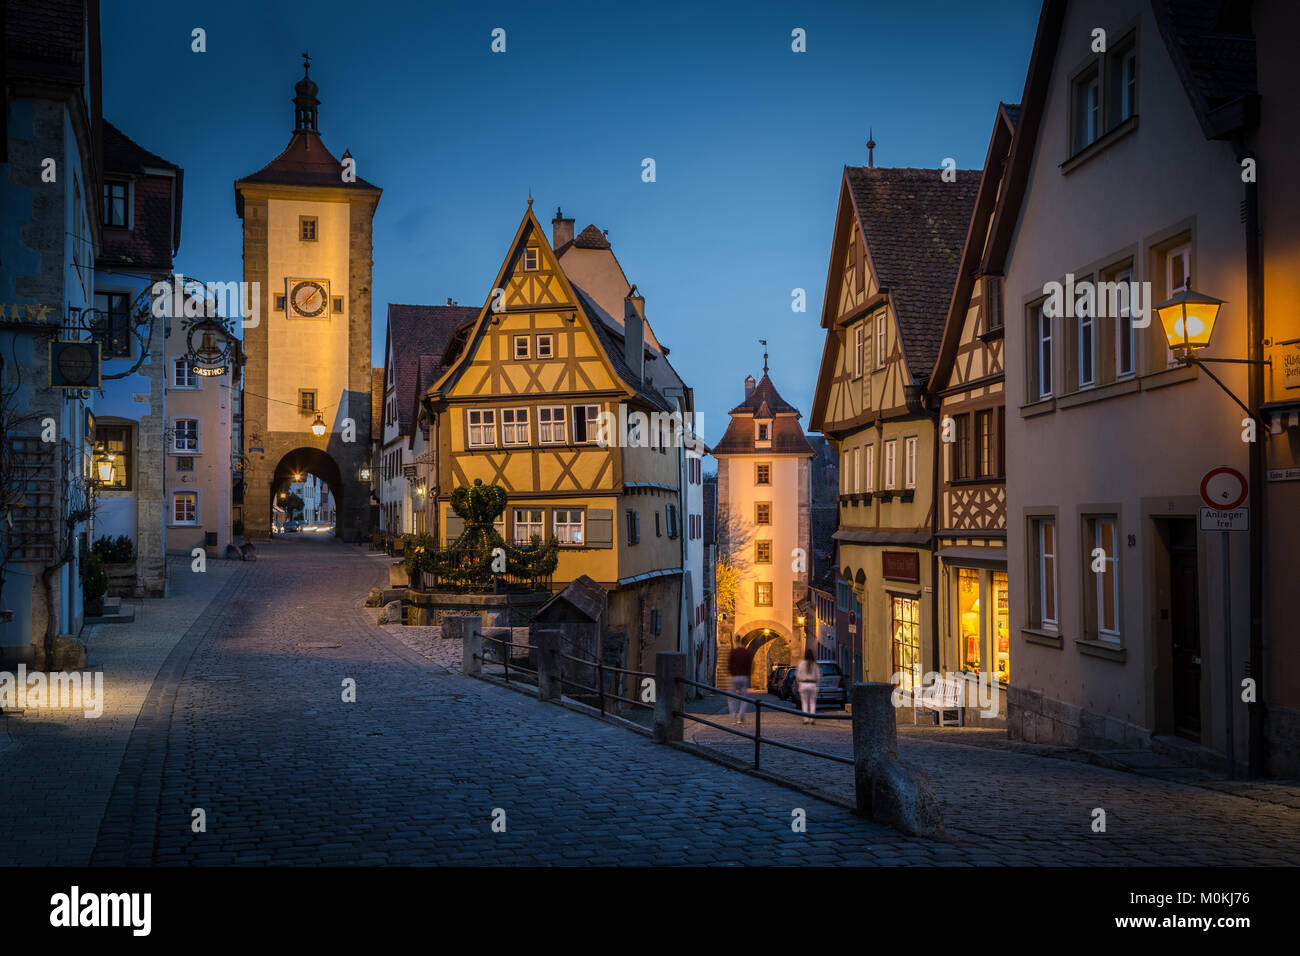 Classic view of the medieval town of Rothenburg ob der Tauber illuminated in beautiful evening twilight during blue hour at dusk, Bavaria, Germany Stock Photo